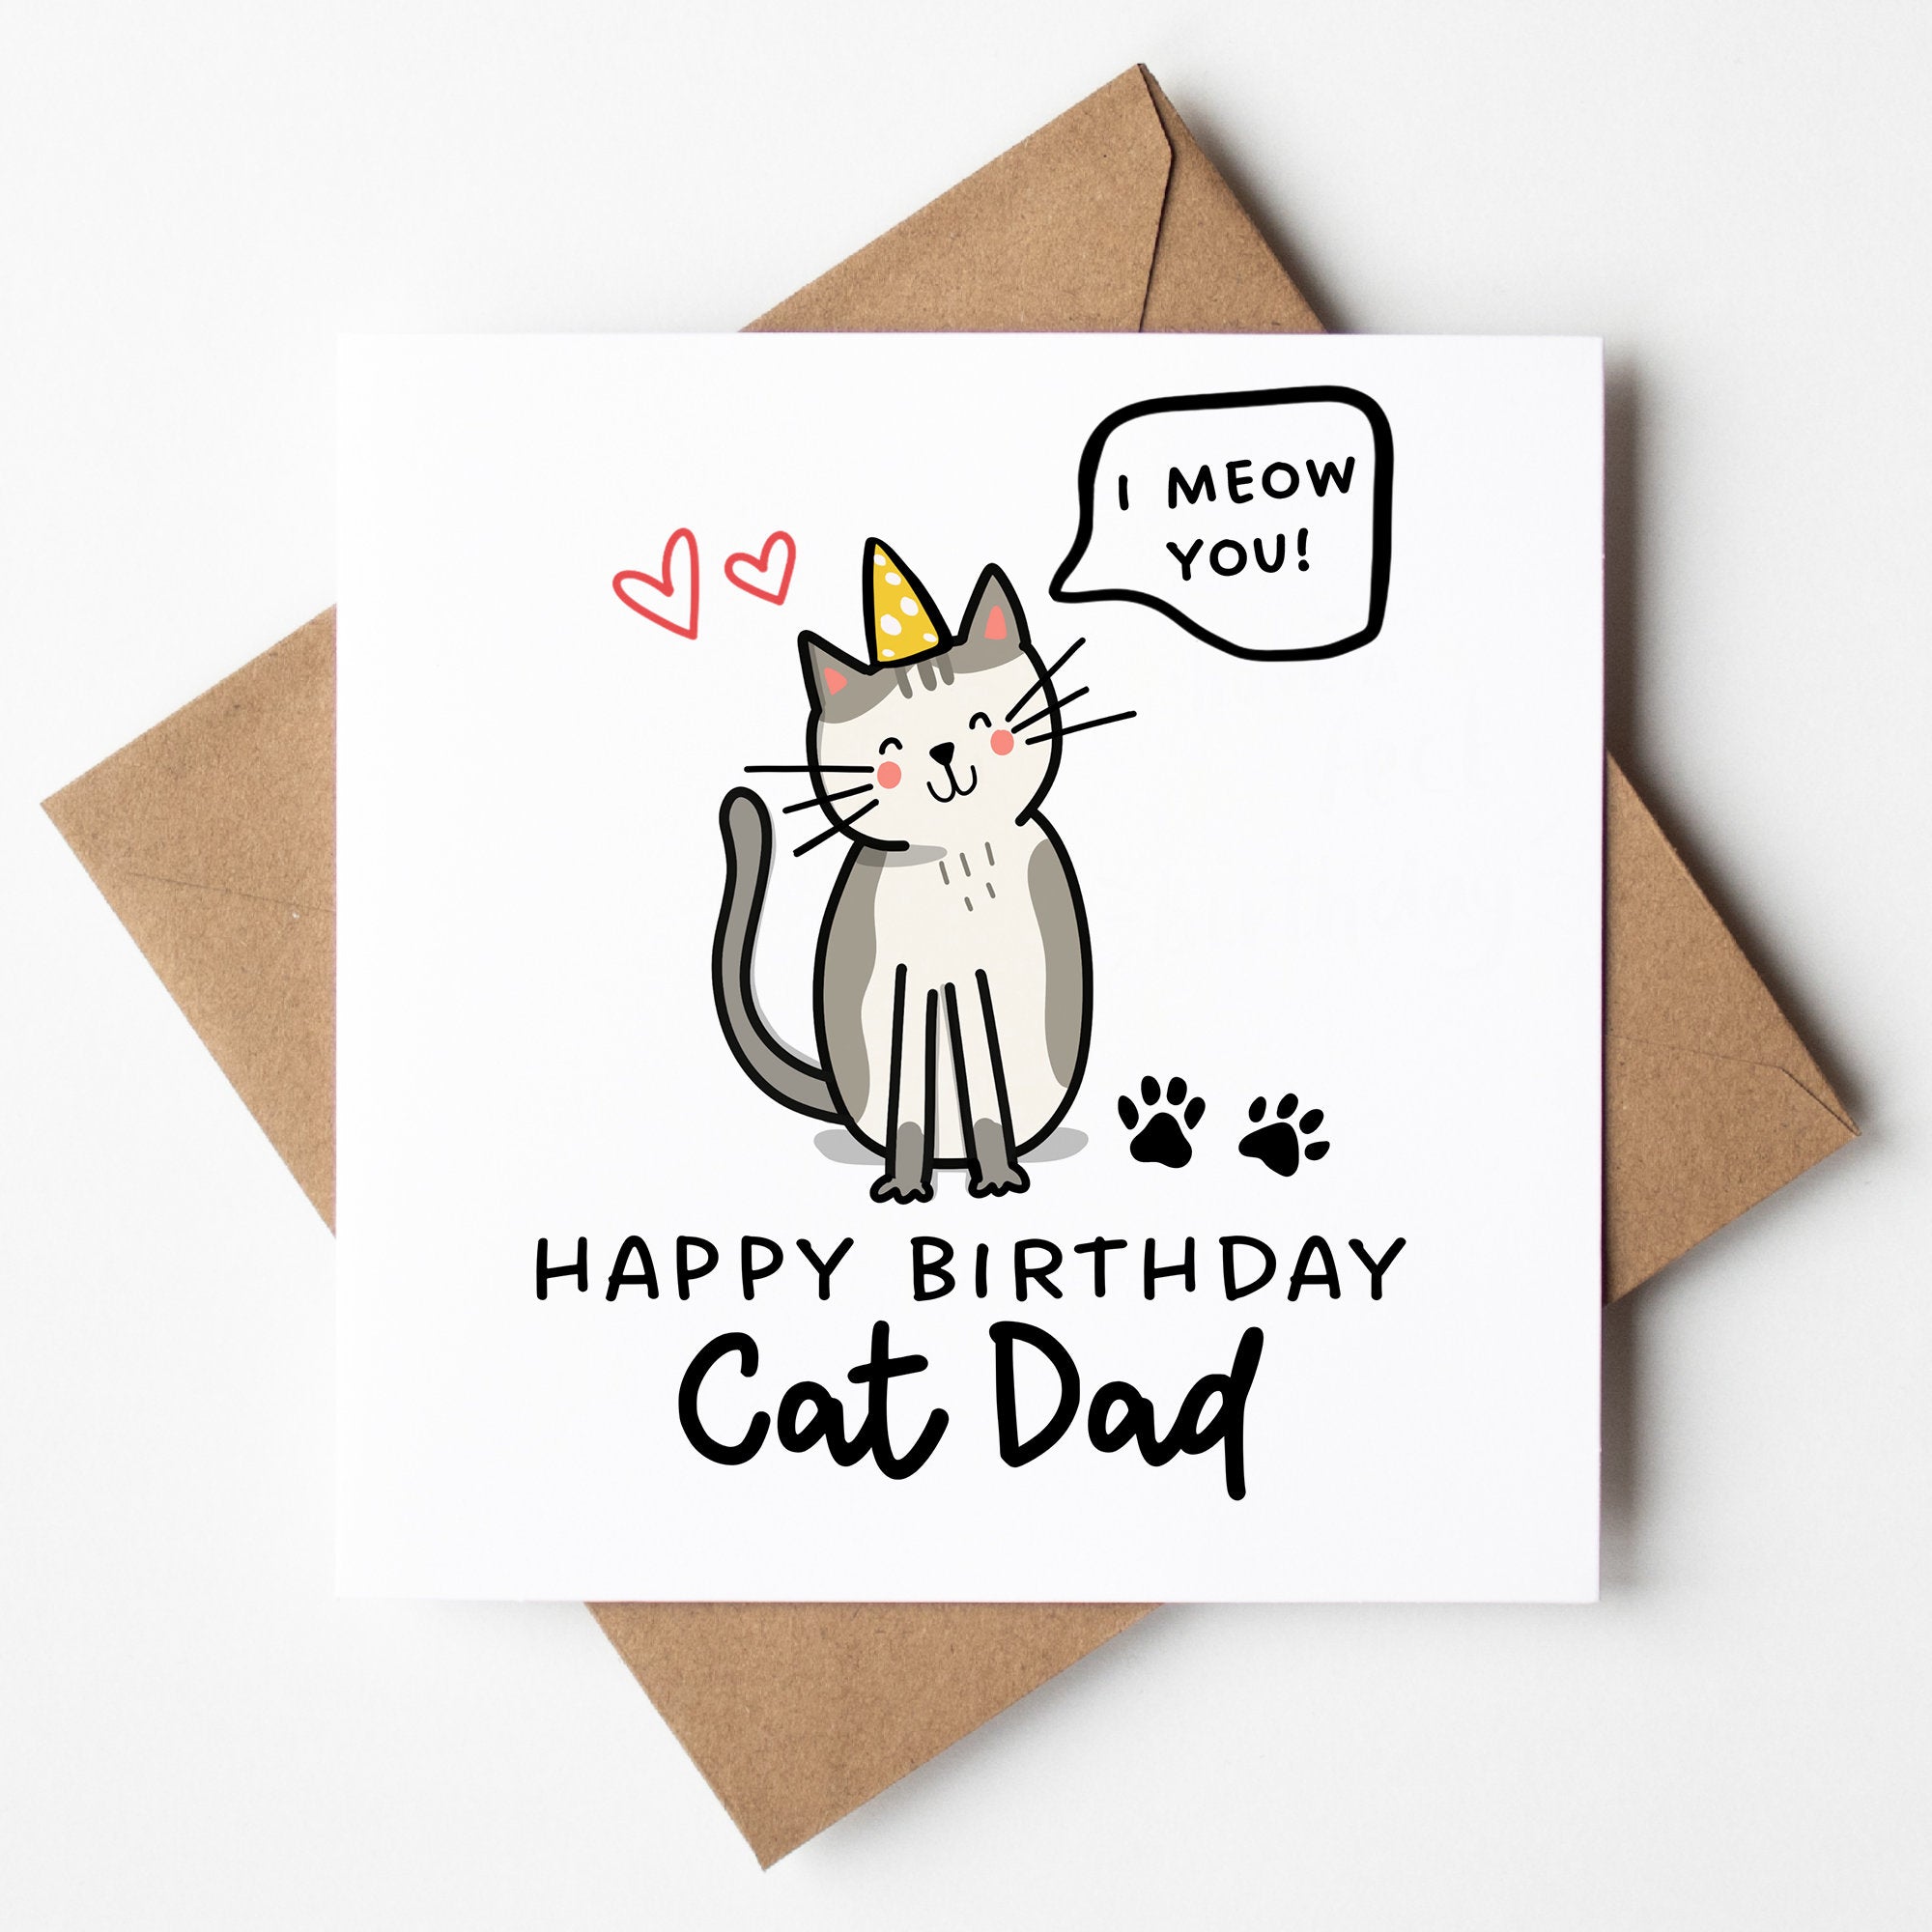 Happy Birthday Cat Dad Card - I Meow You - Funny Card From the Cat